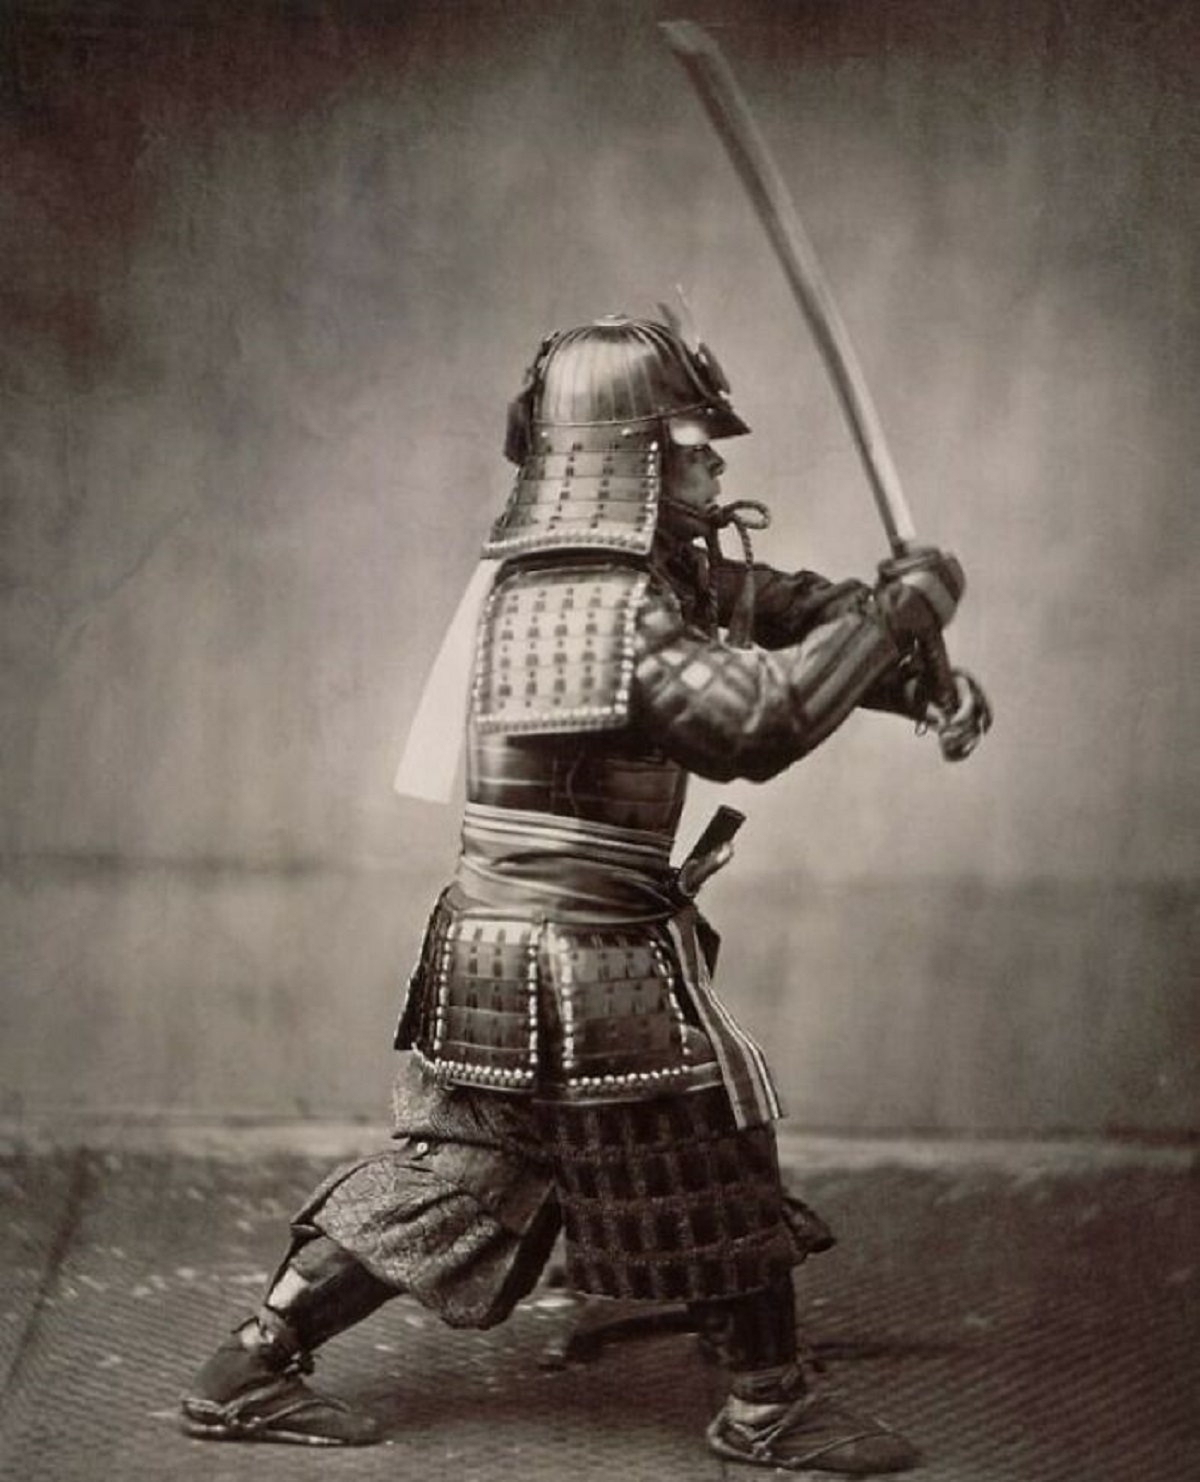 An Armored Japanese Samurai Of The Tokugawa Shogunate Photographed By Photographer Felice Beato In The 1860s